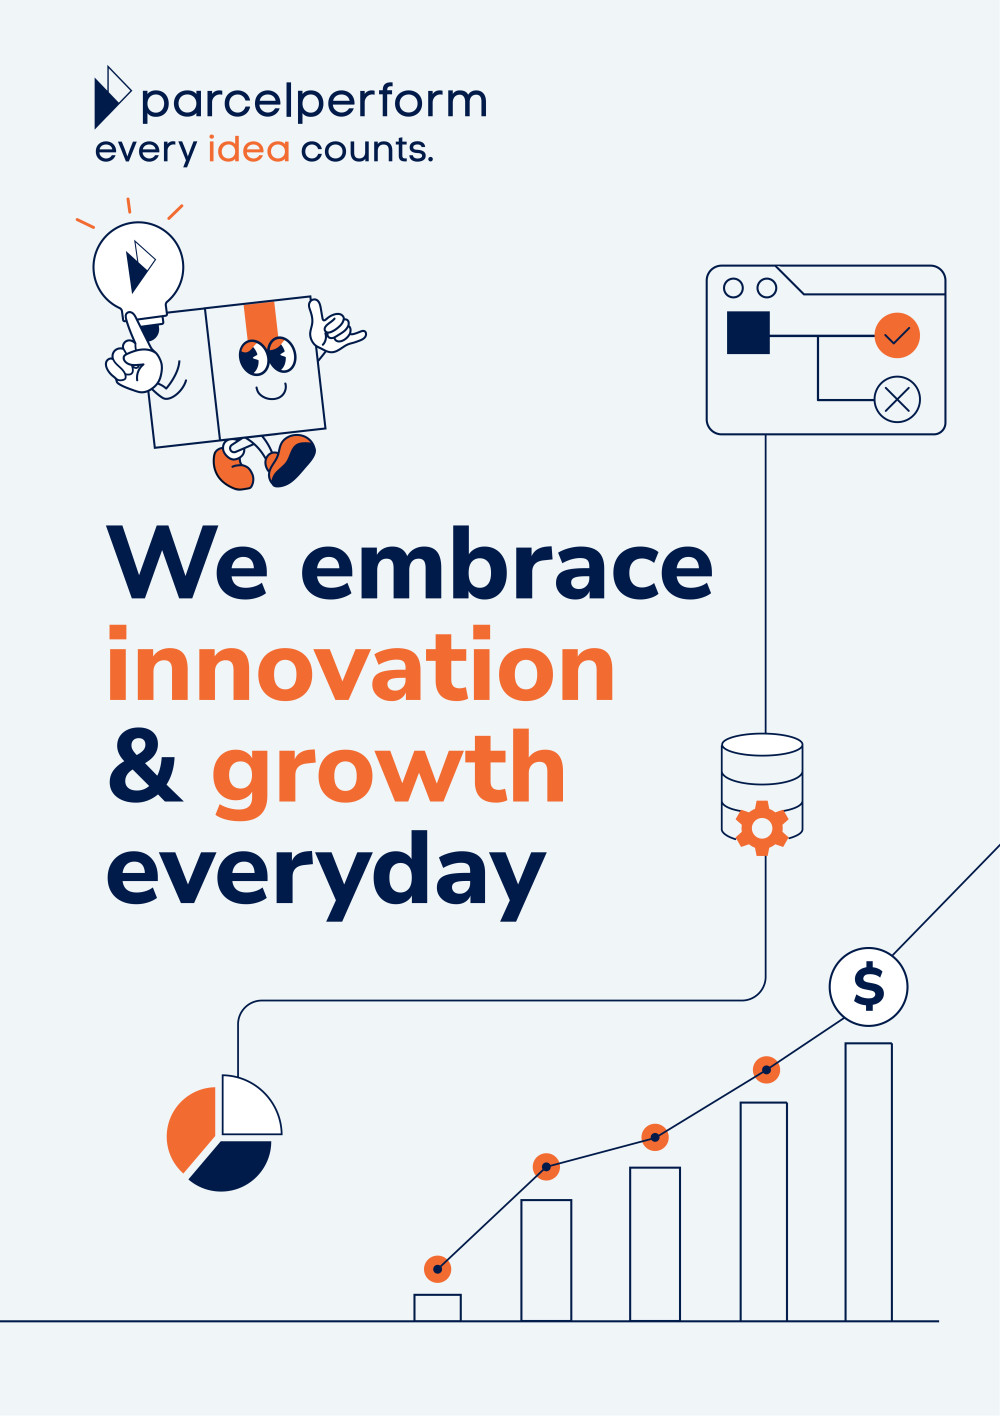 Parcel Perform culture value - We embrace innovation & growth everyday